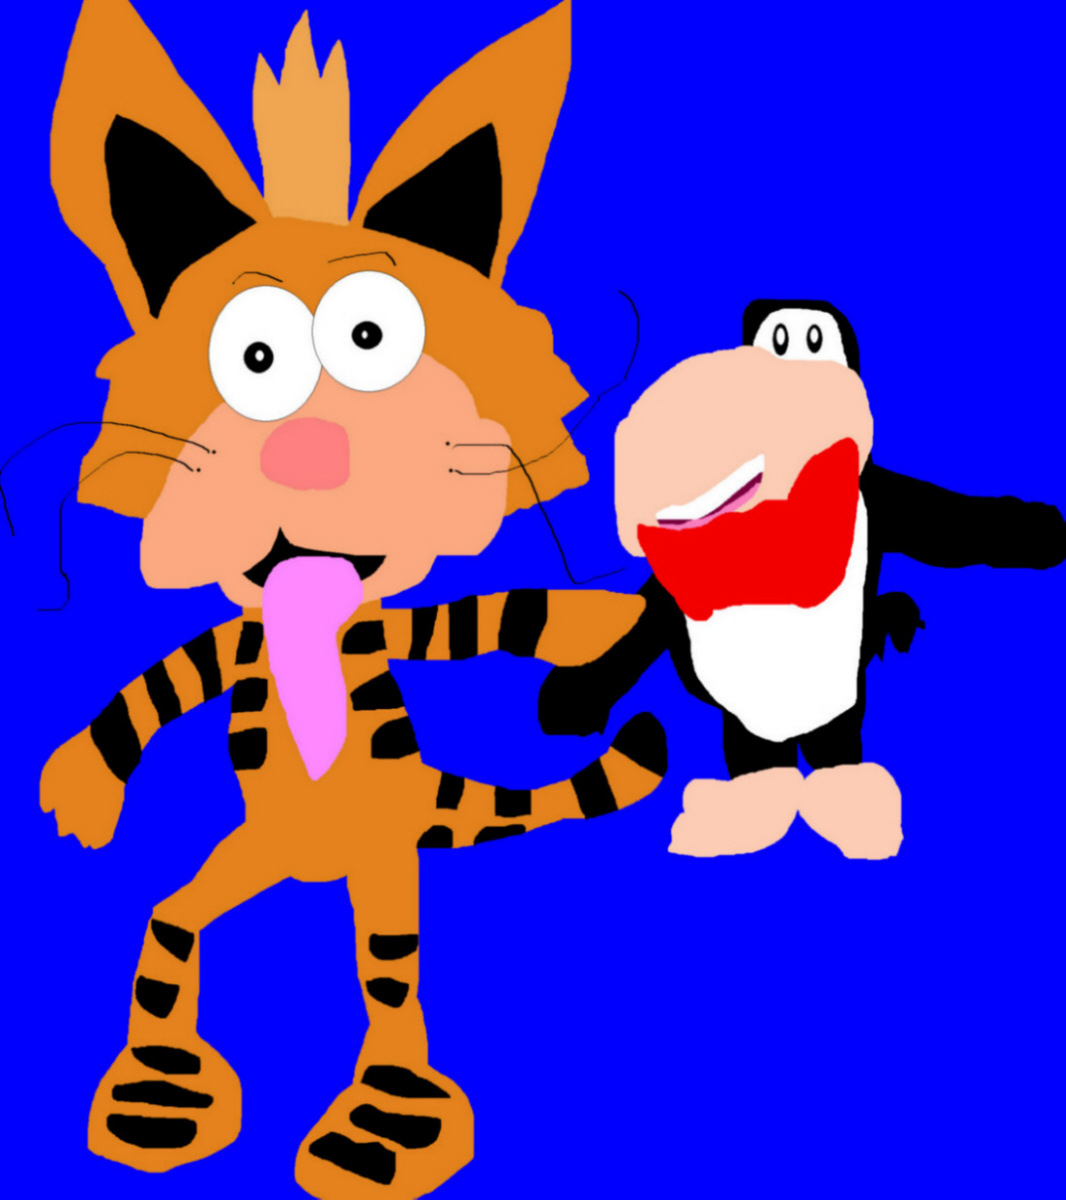 Opus Penguin And Bill The Cat Chibis MS Paint by Falconlobo